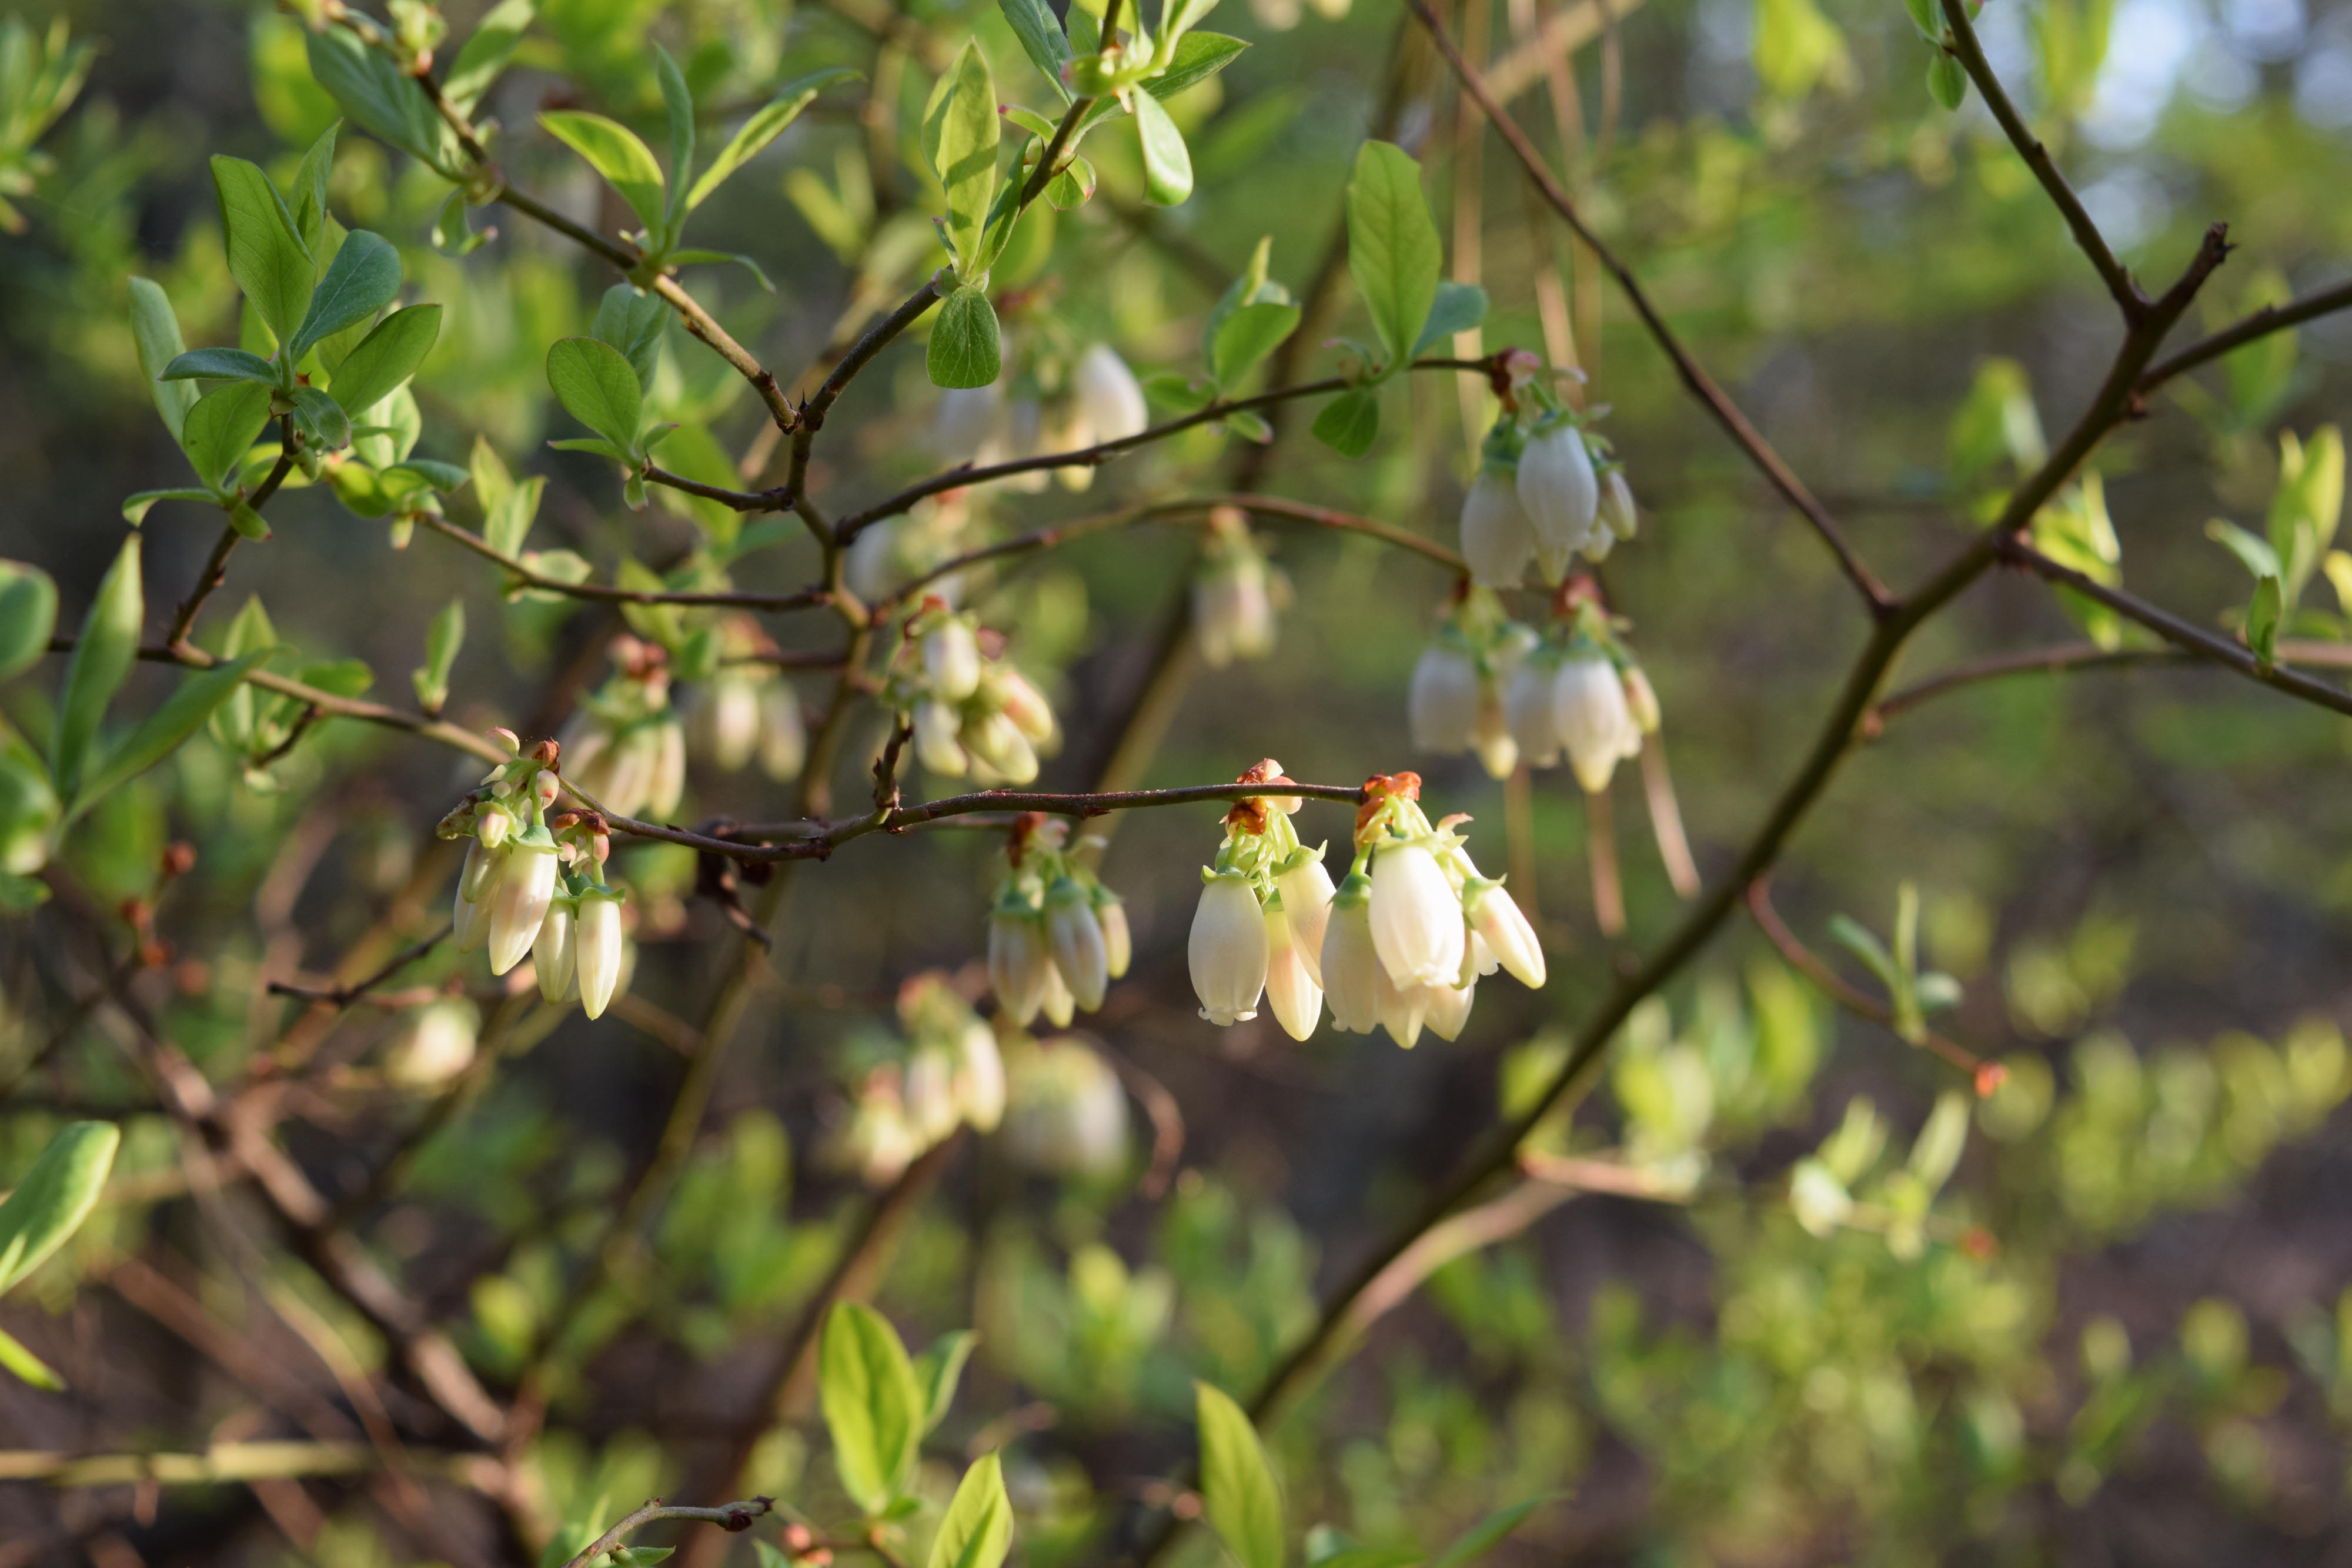 Several white downturned flowers hang off of a branch with green leaves.